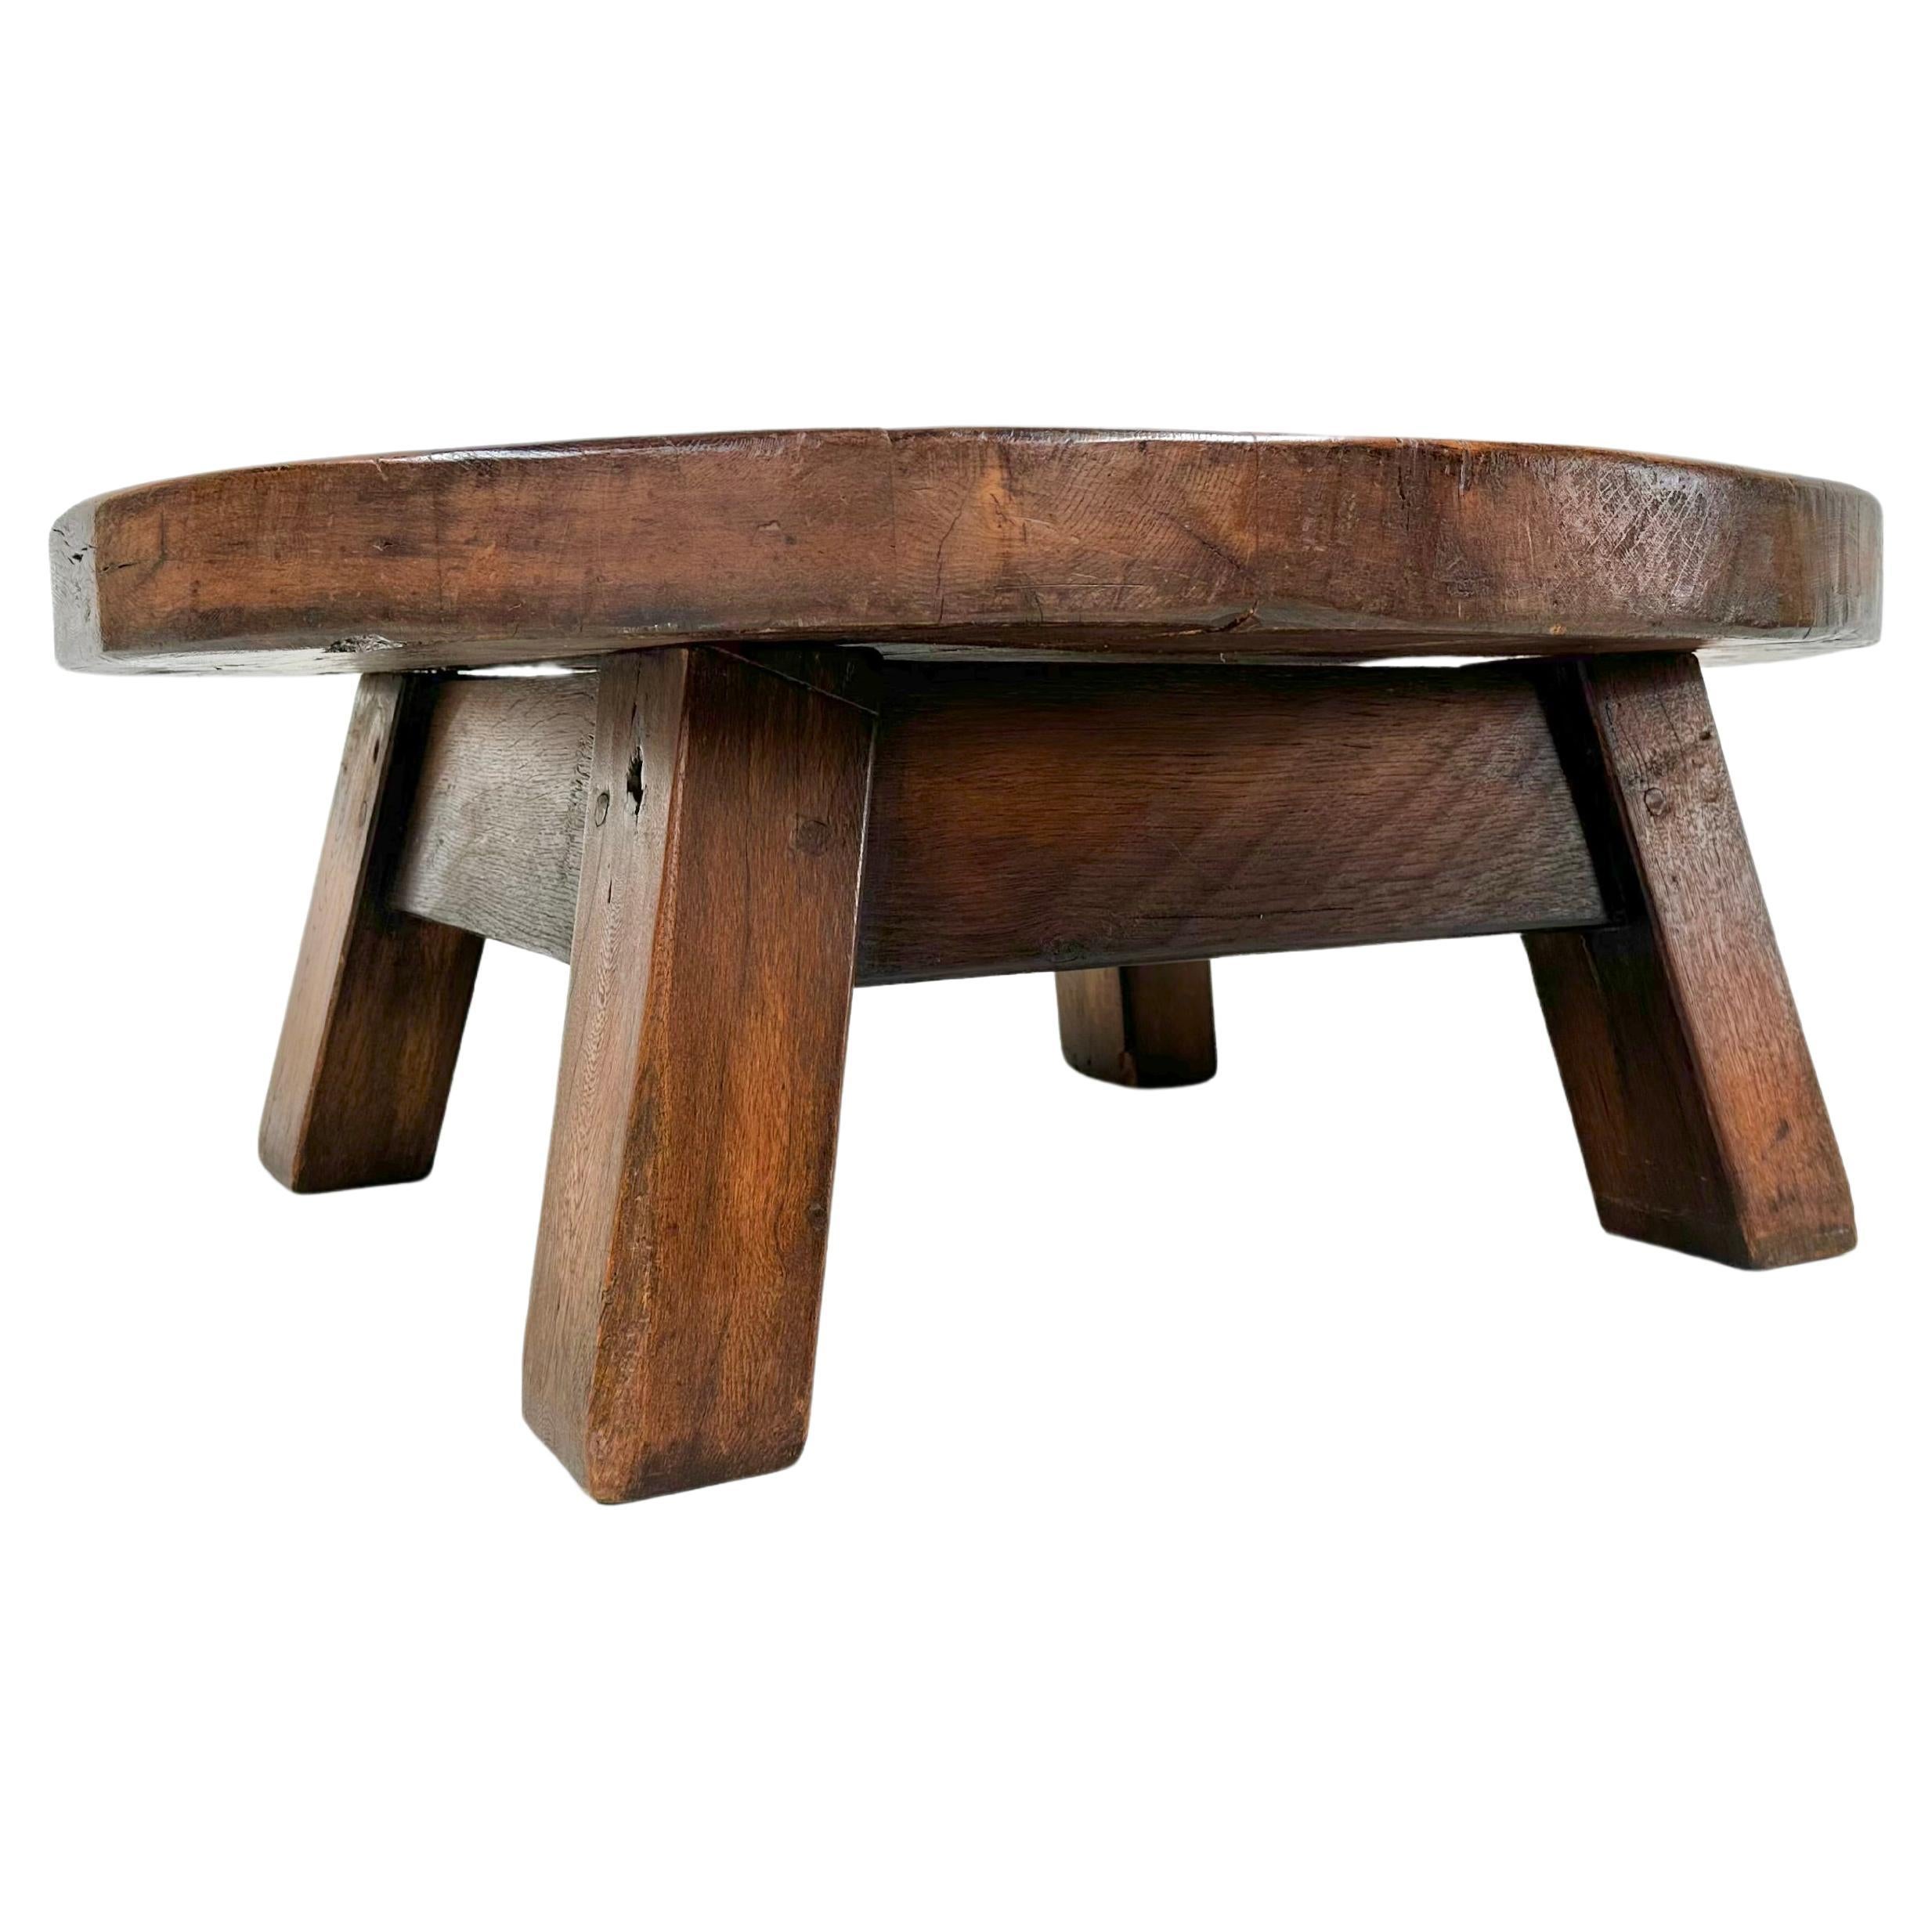 French Antique Oak Brutalist Coffee Table, 1920s.